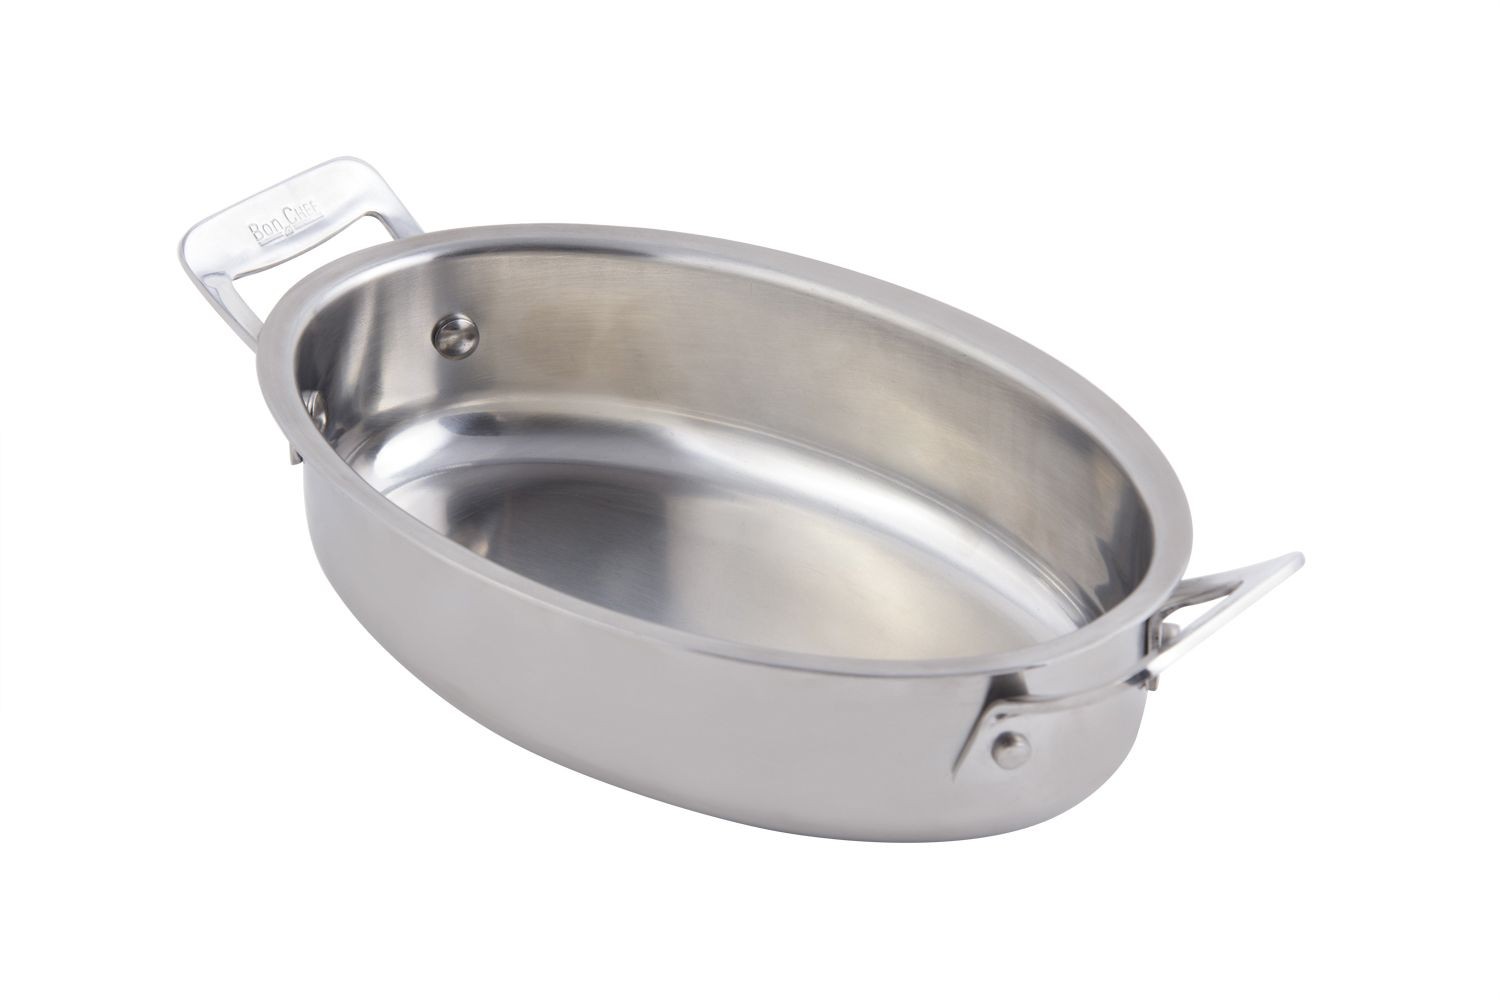 Bon Chef 60029 Cucina Stainless Steel Oval Dish, 36 oz.